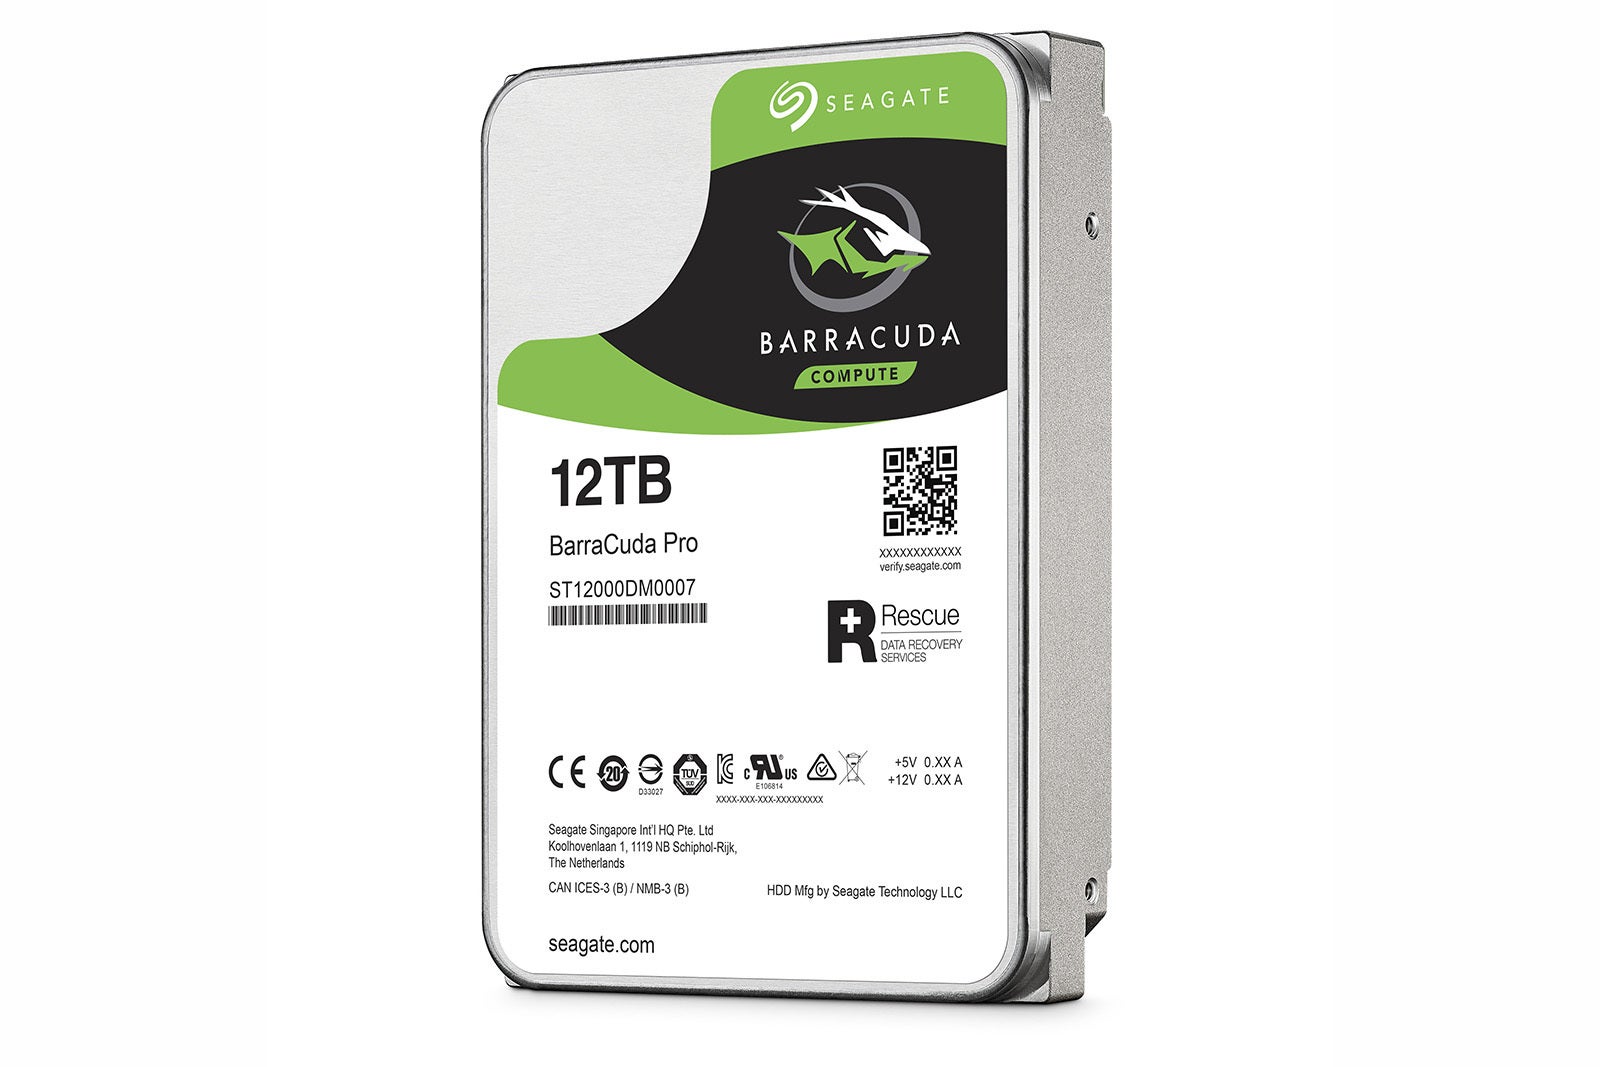 Seagate Barracuda Pro 12TB review: Speedy, spacious proof that the hard drive isn't dead